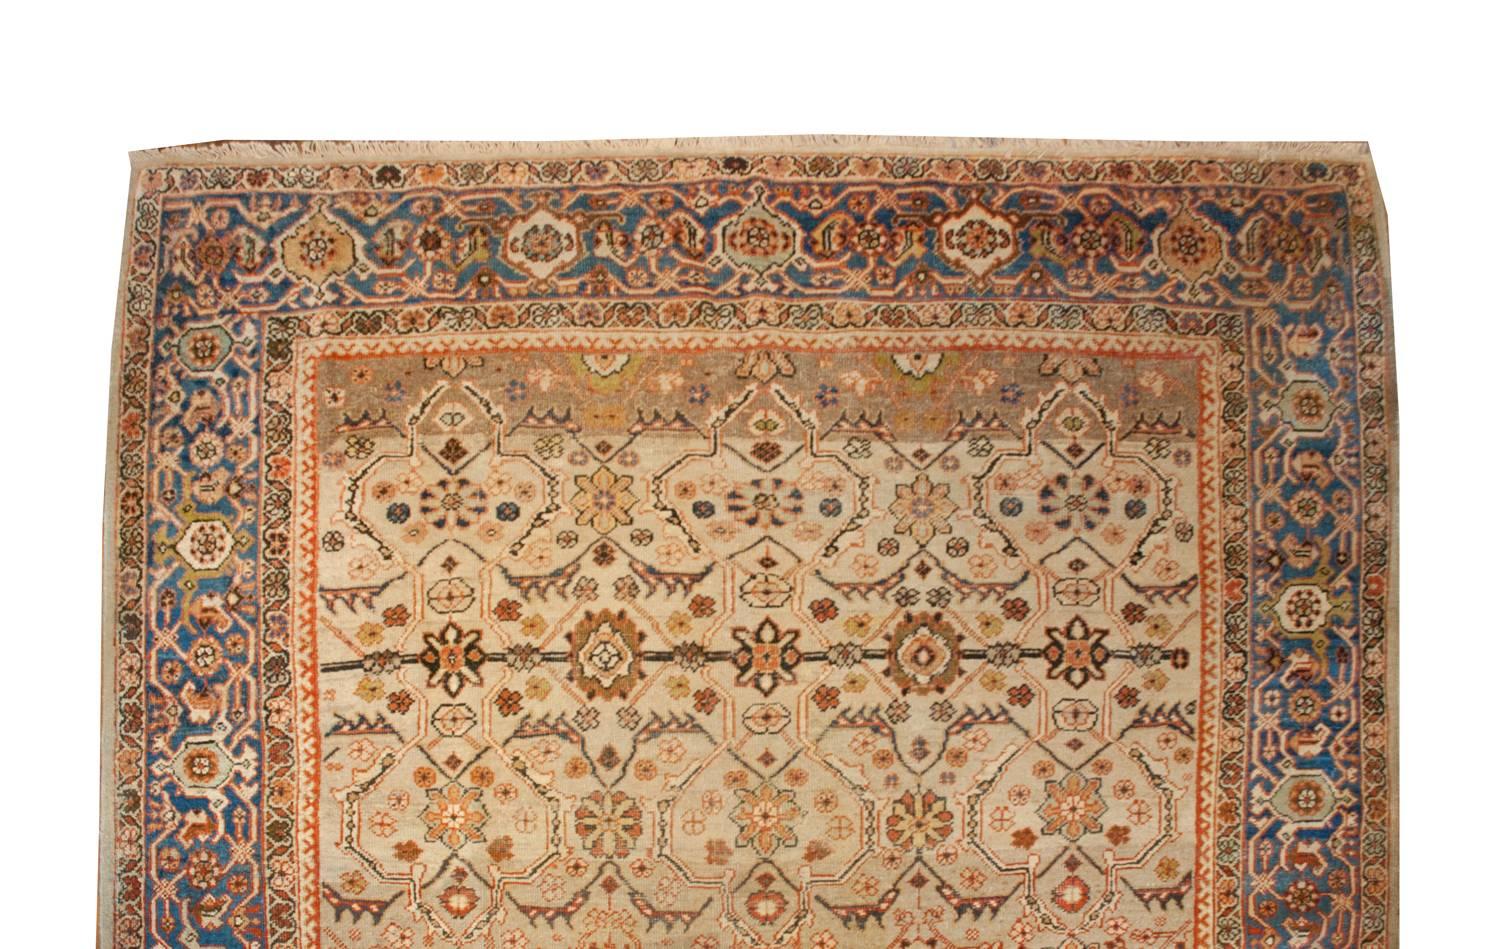 An exquisite early 20th century Persian Mahal rug with a gorgeous lattice-work floral field woven with indigo, crimson, gold and coral vegetable dyed wool, on a natural, undyed, wool background. The border is fantastic with a wide central border